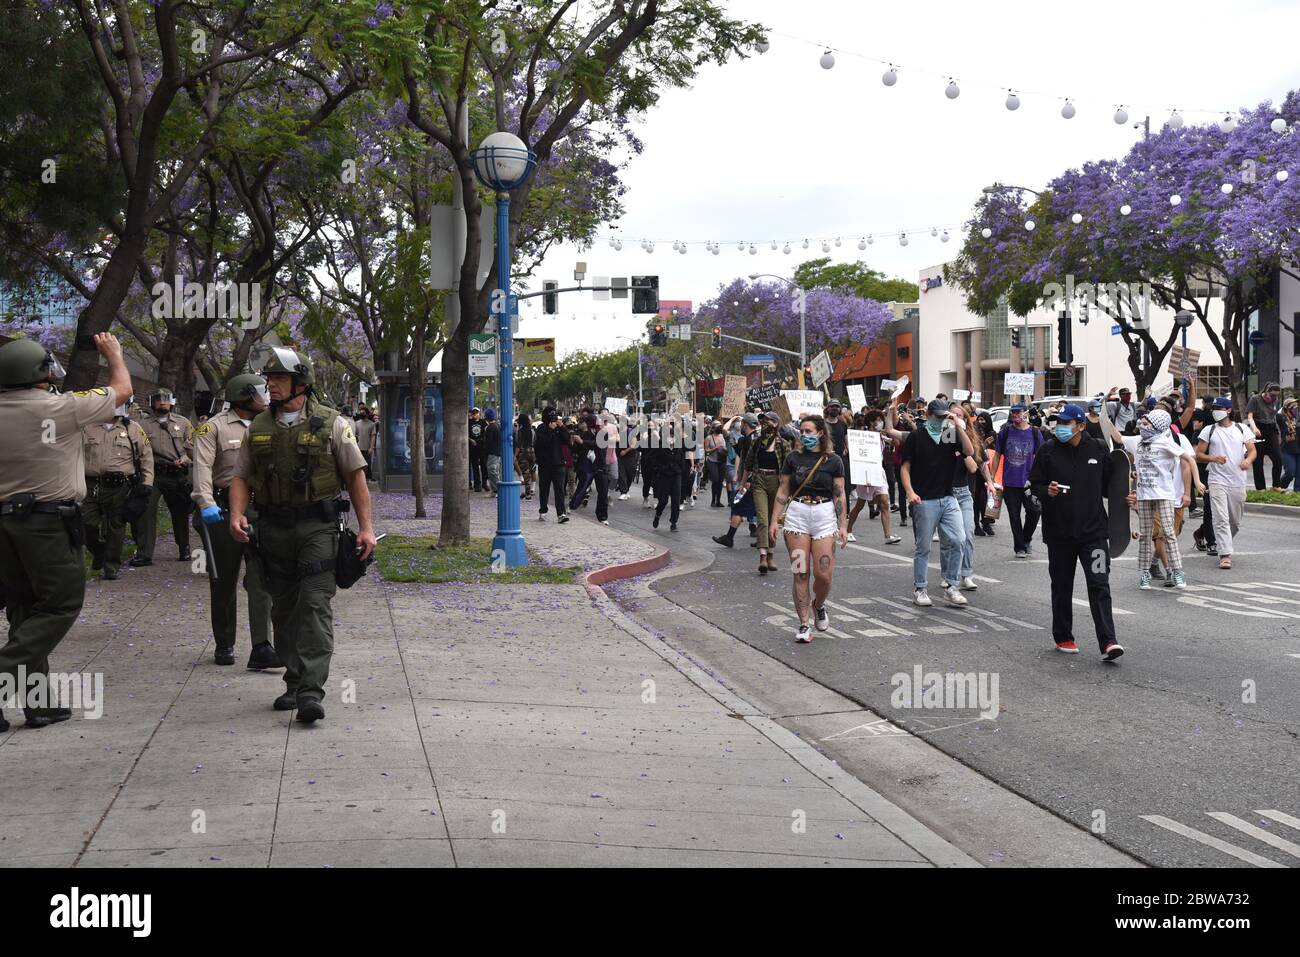 West Hollywood, CA/USA - May 30, 2020: Black Lives Matter protesters demanding justice for George Floyd and police on Santa Monica Blvd Stock Photo